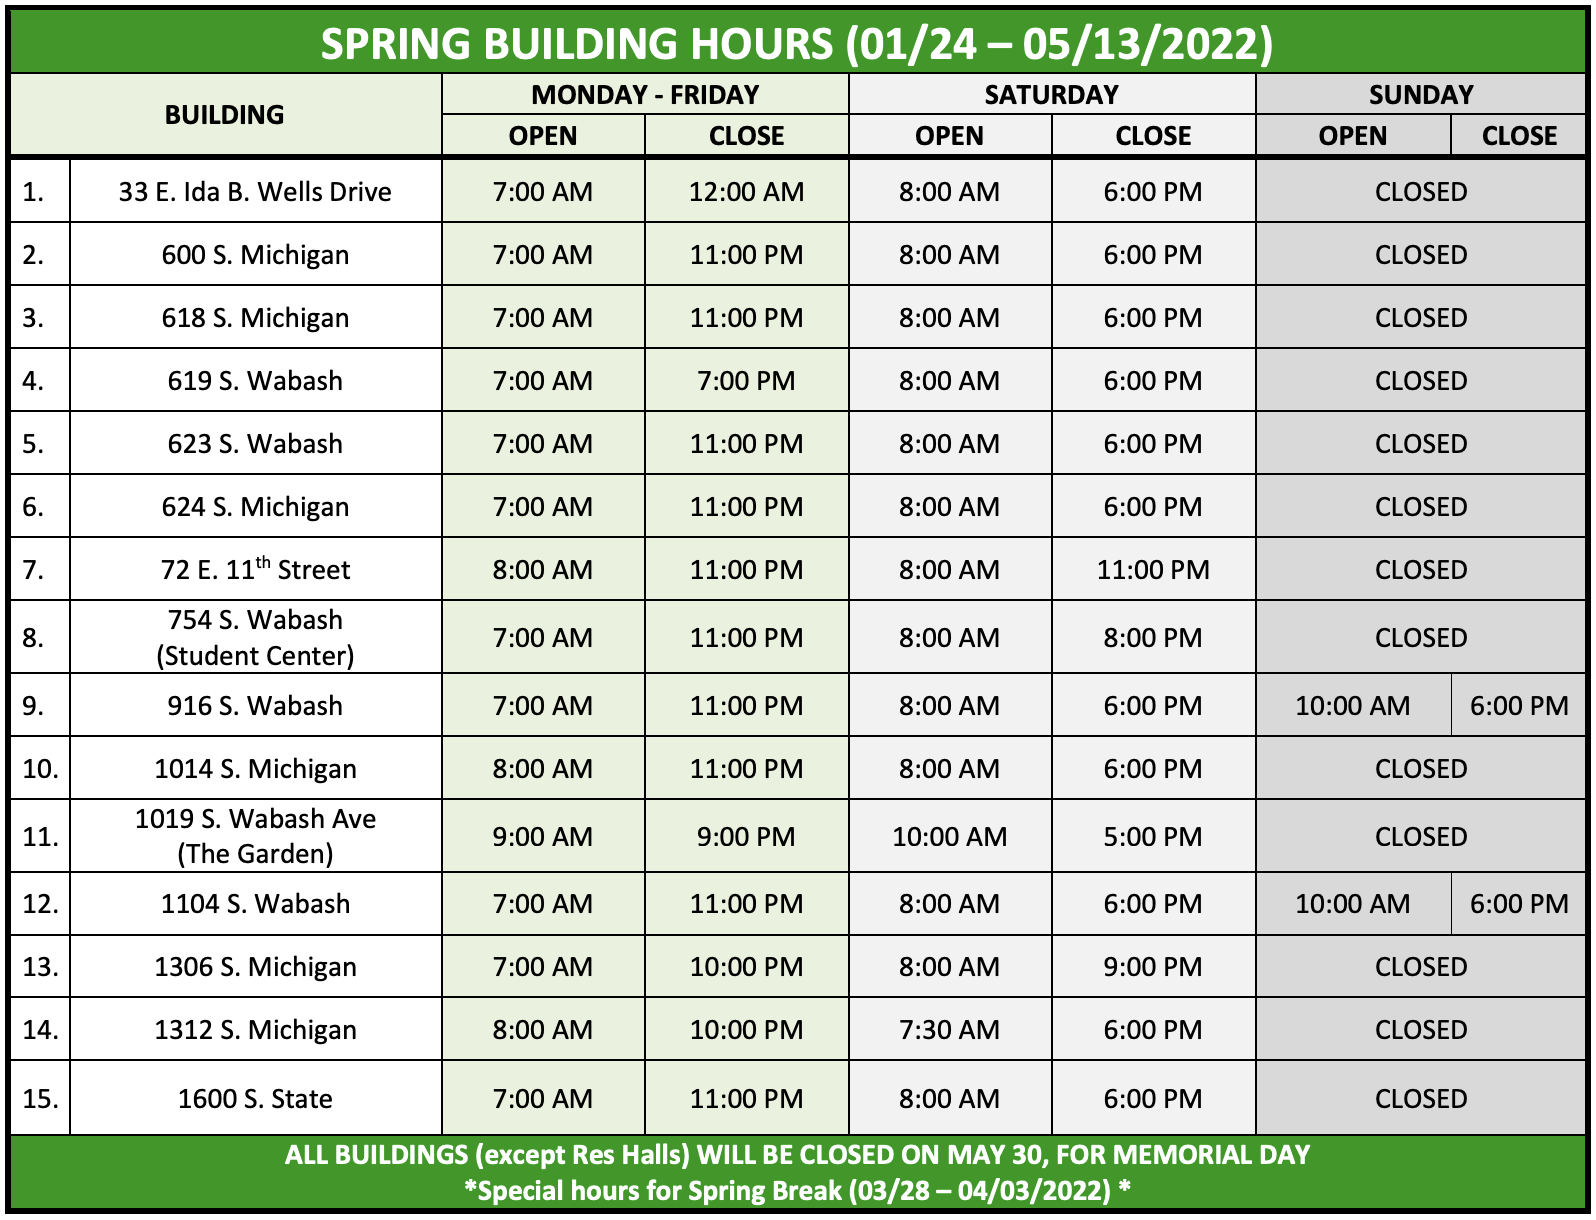 Columbia Calendar Spring 2022 Building Hours - Columbia College Chicago